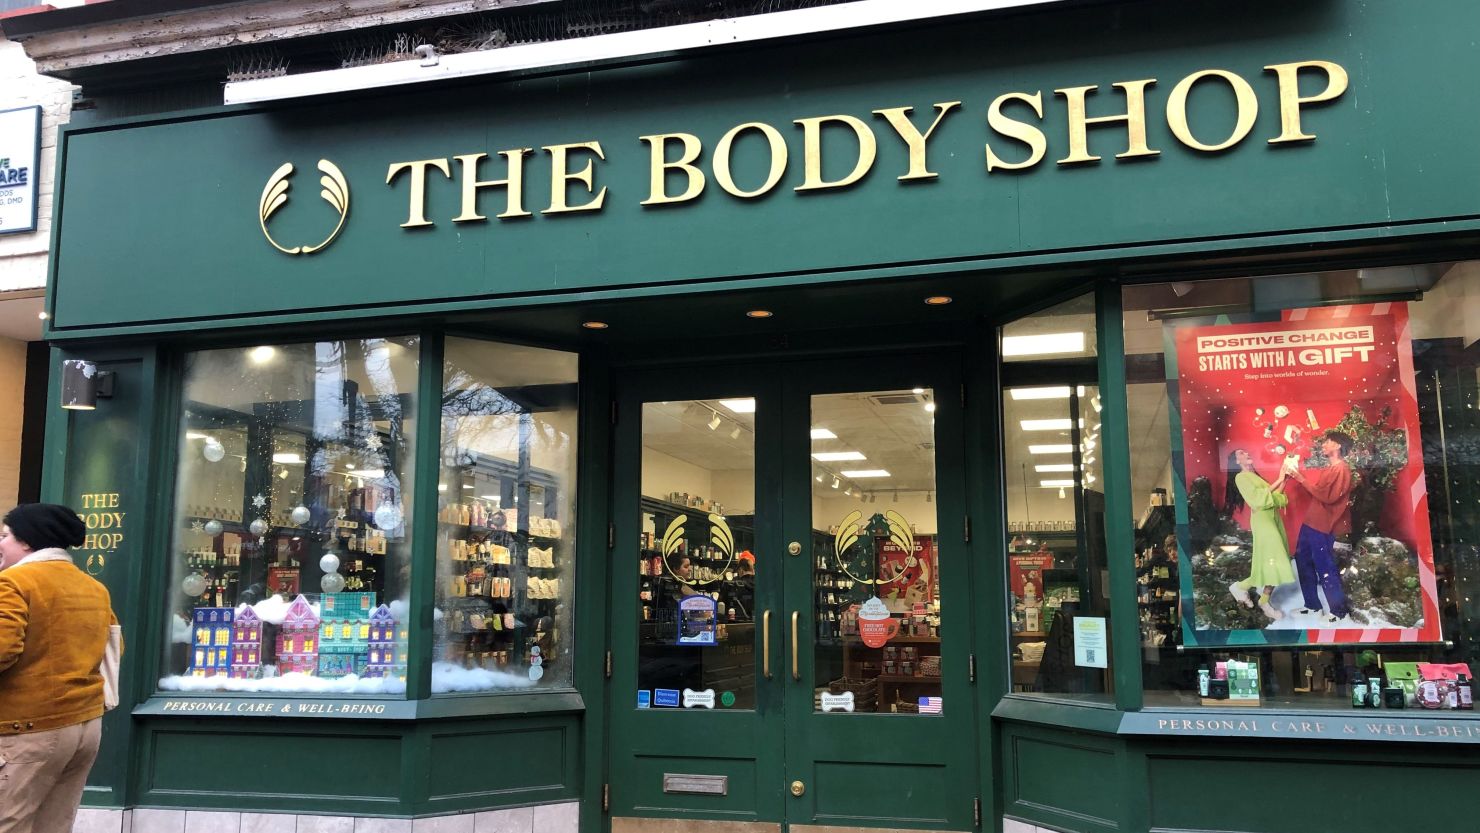 The Body Shop to cut 300 head office jobs and almost half of UK stores  could close, Retail industry